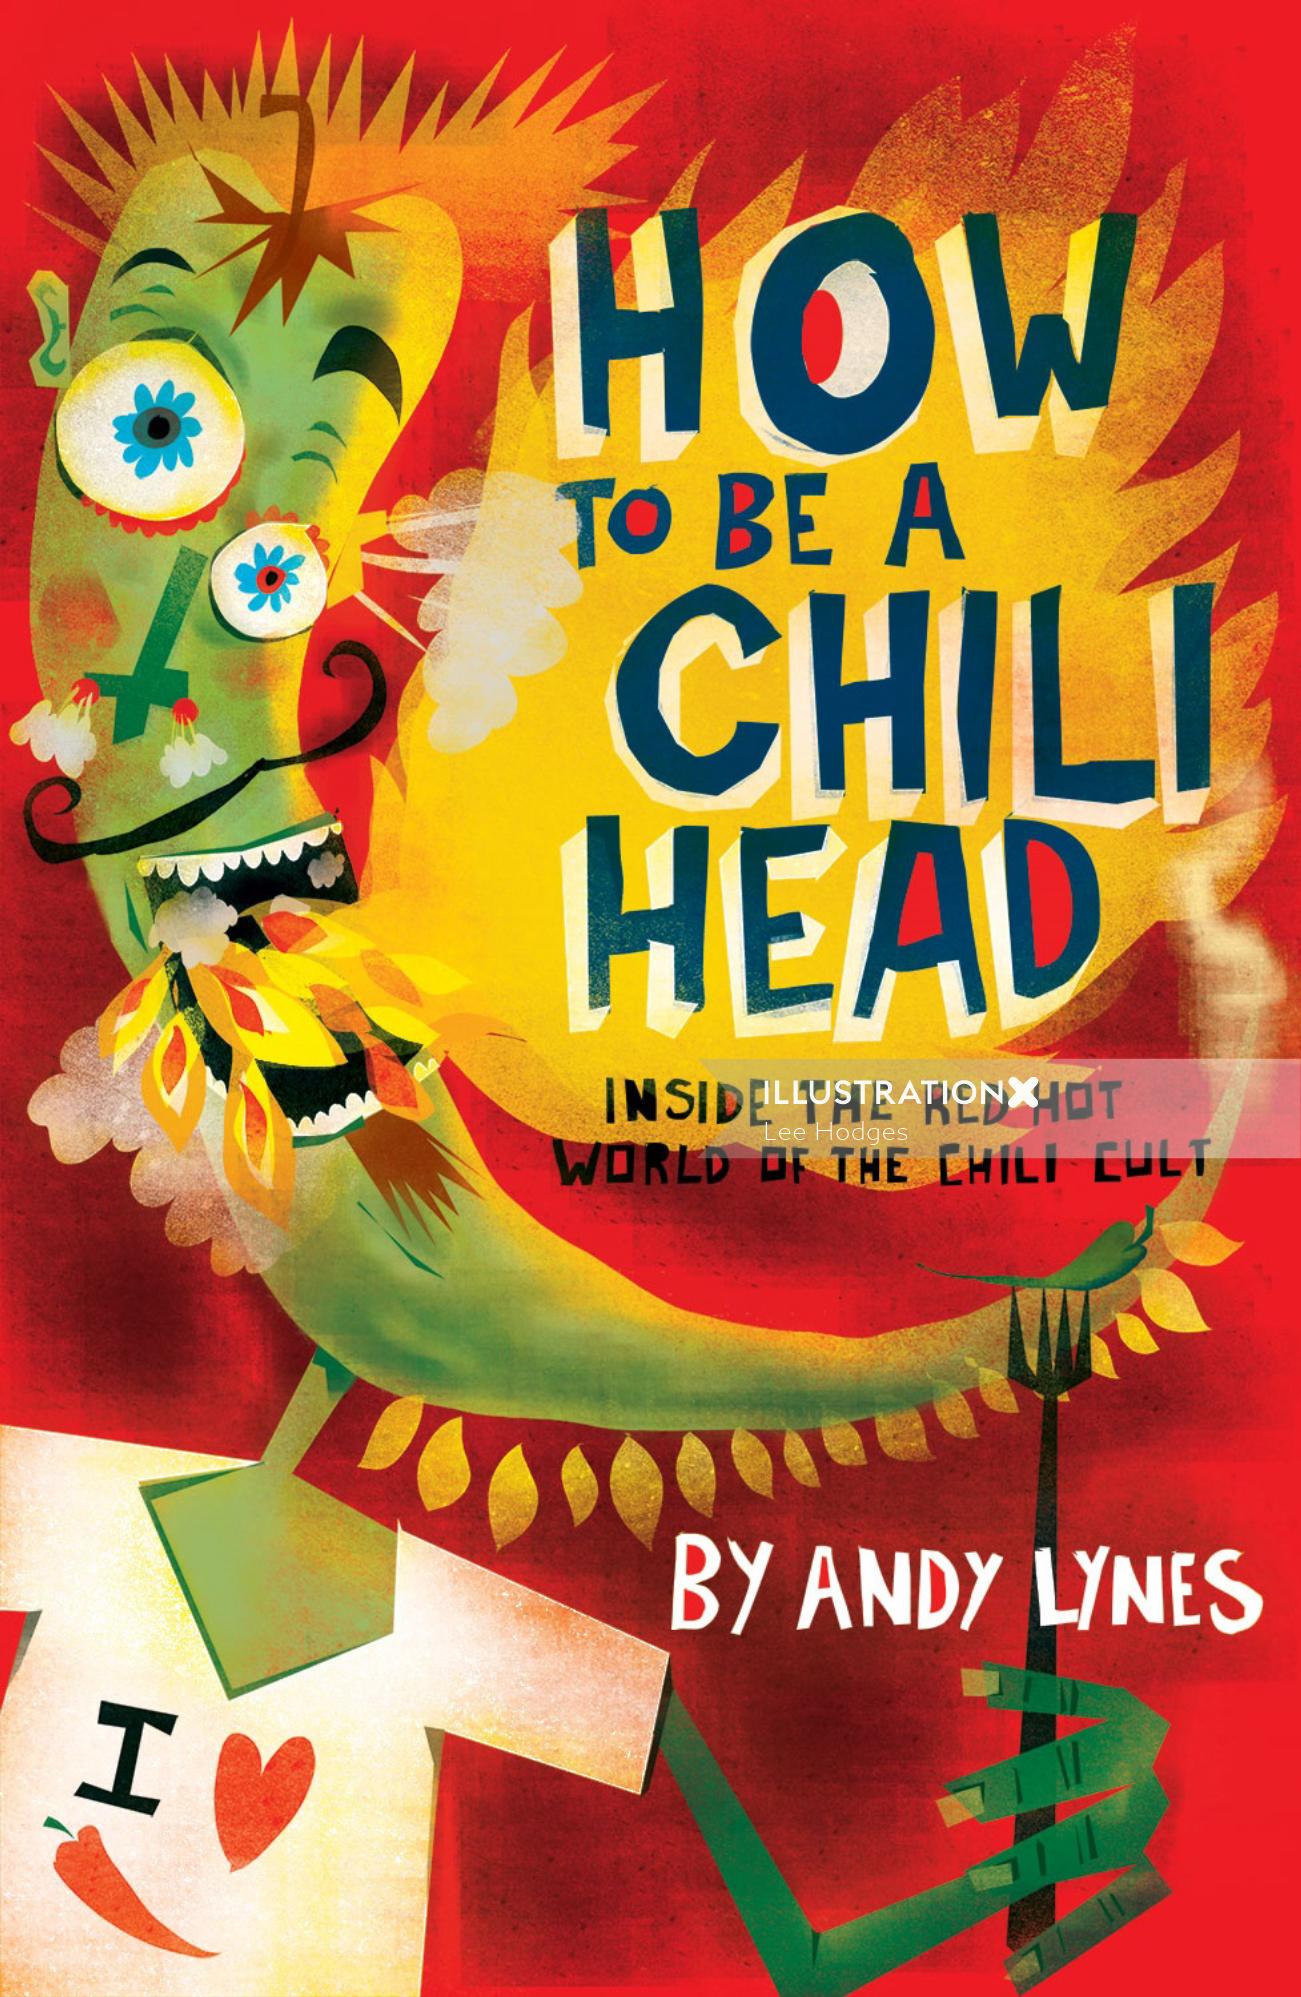 How to Be a Chili Head book cover artwork